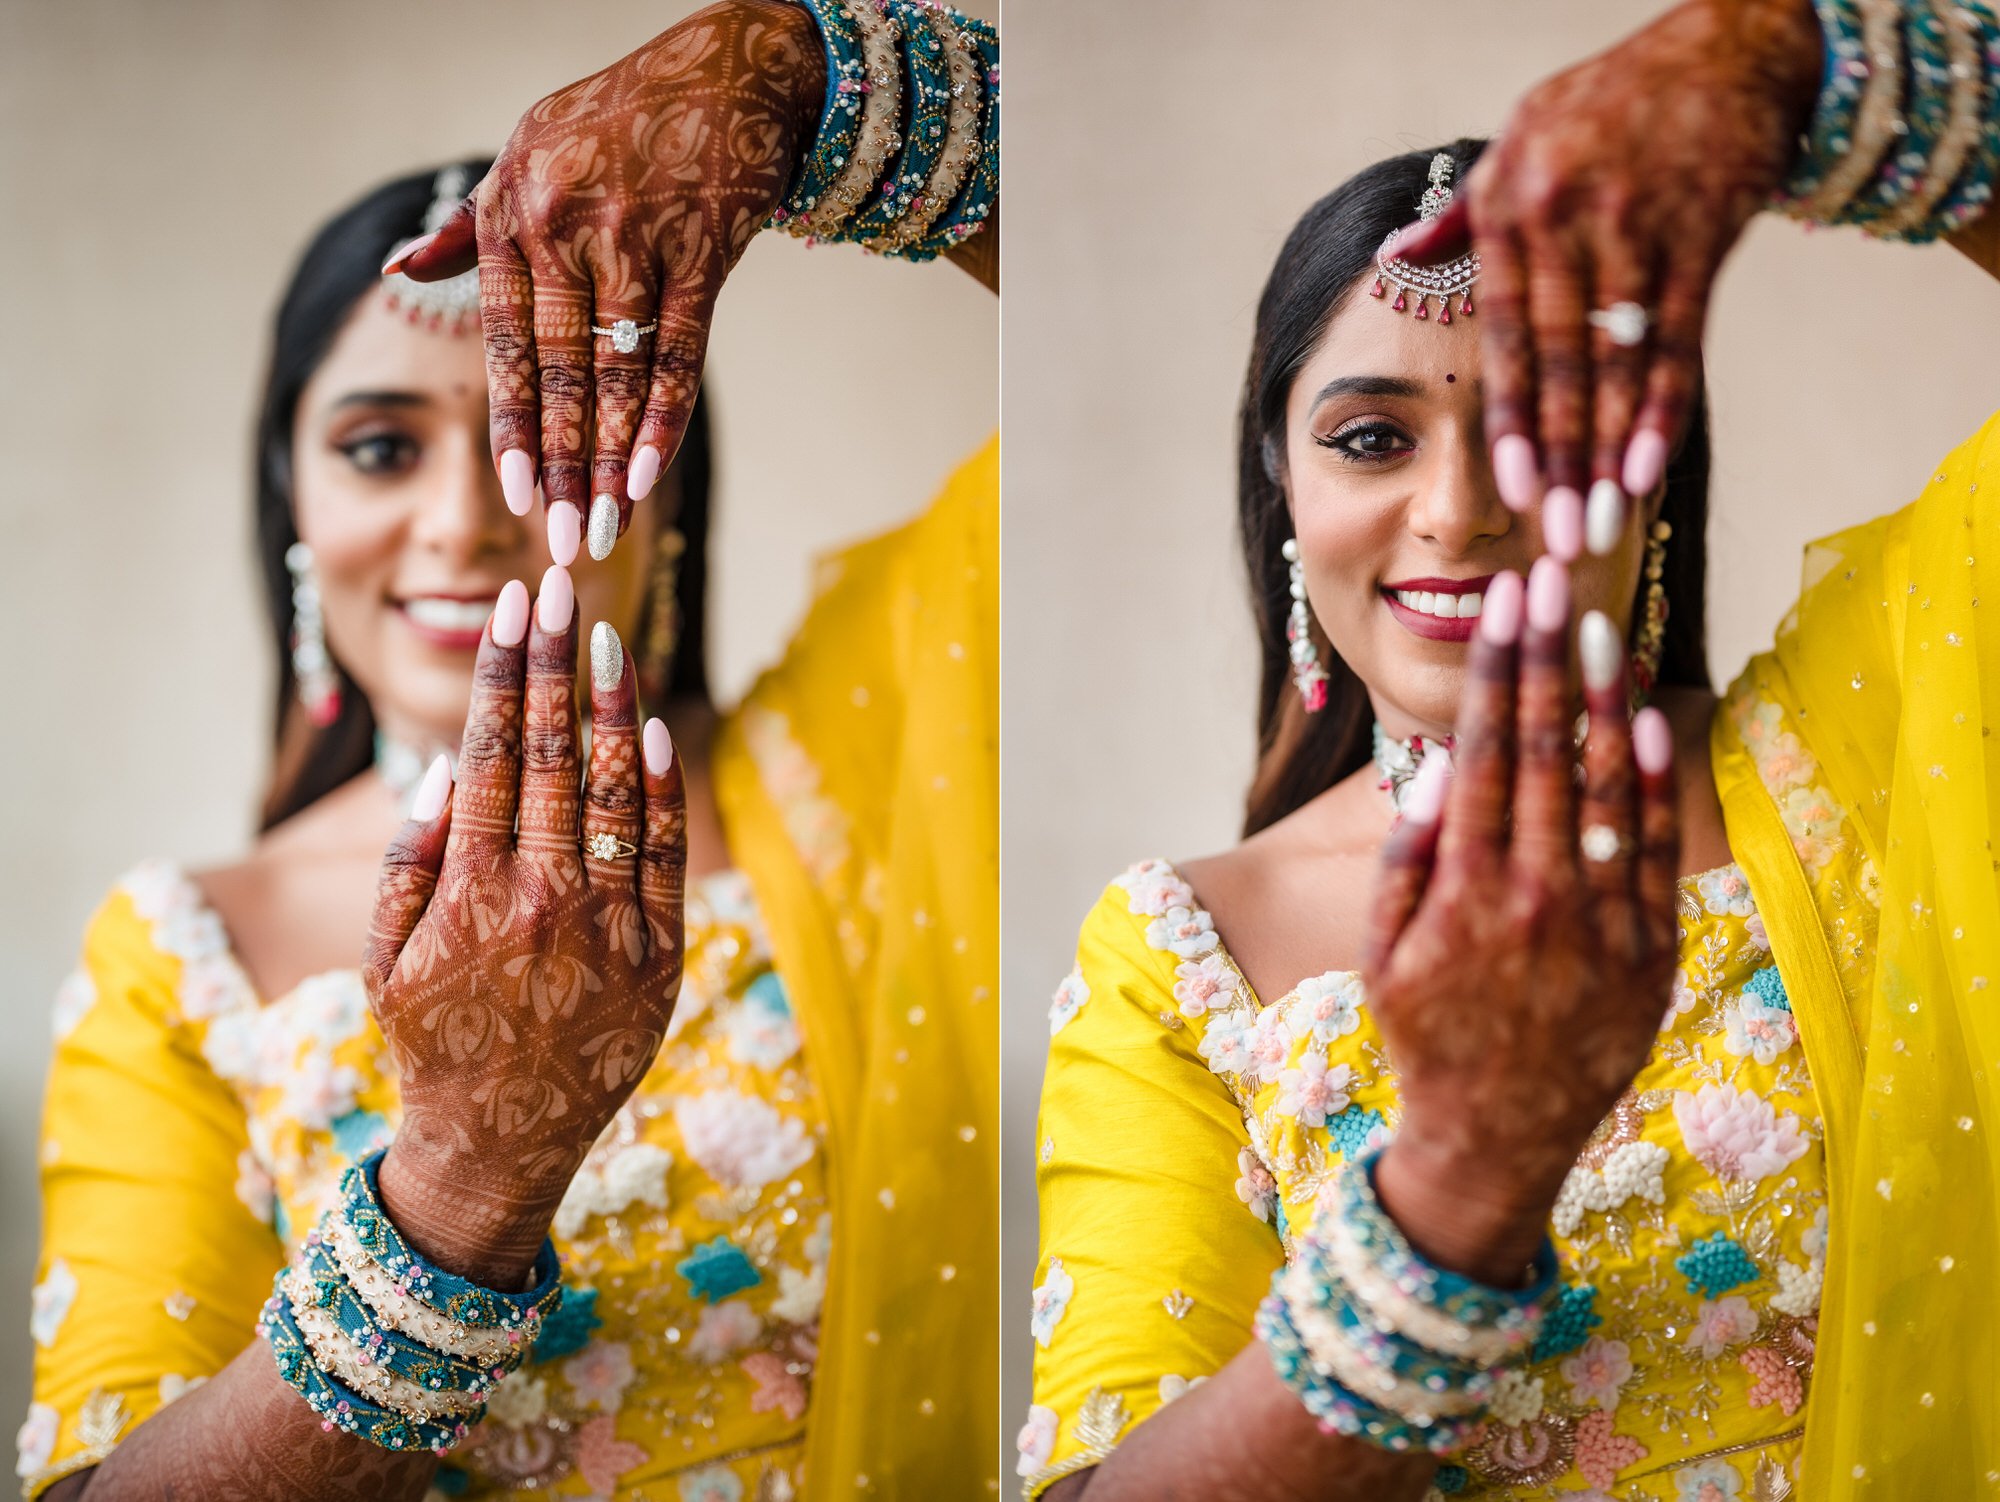 50+ Wedding Poses to Capture the Most Special Moments of Your Big Day